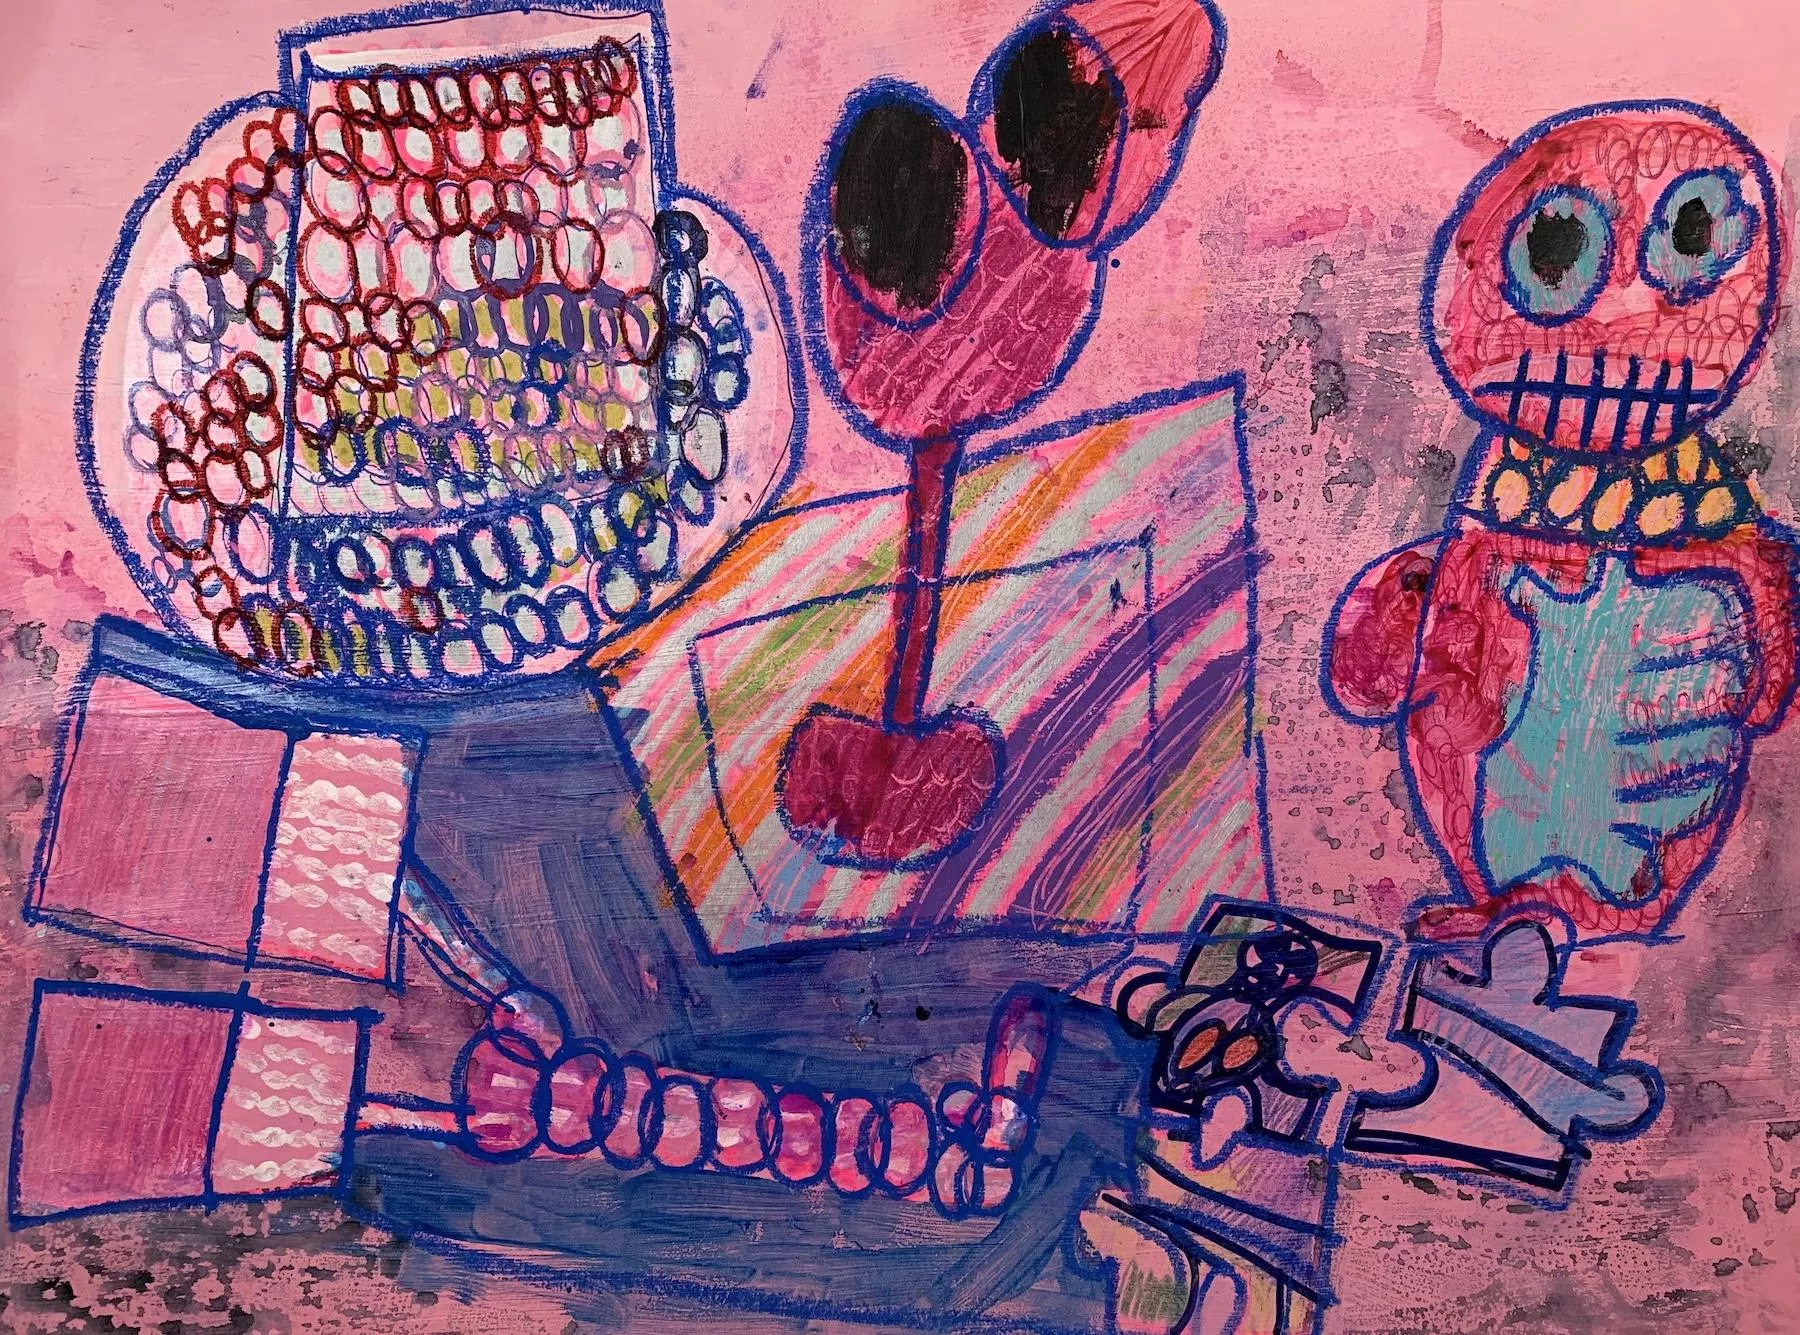 Multiple objects and a small singular figure on the right sit in the foreground of an expansive pink pictureplane. Heavy texture and a combination of both geometric and organic shapes are used to make up the forms featured in the artwork.